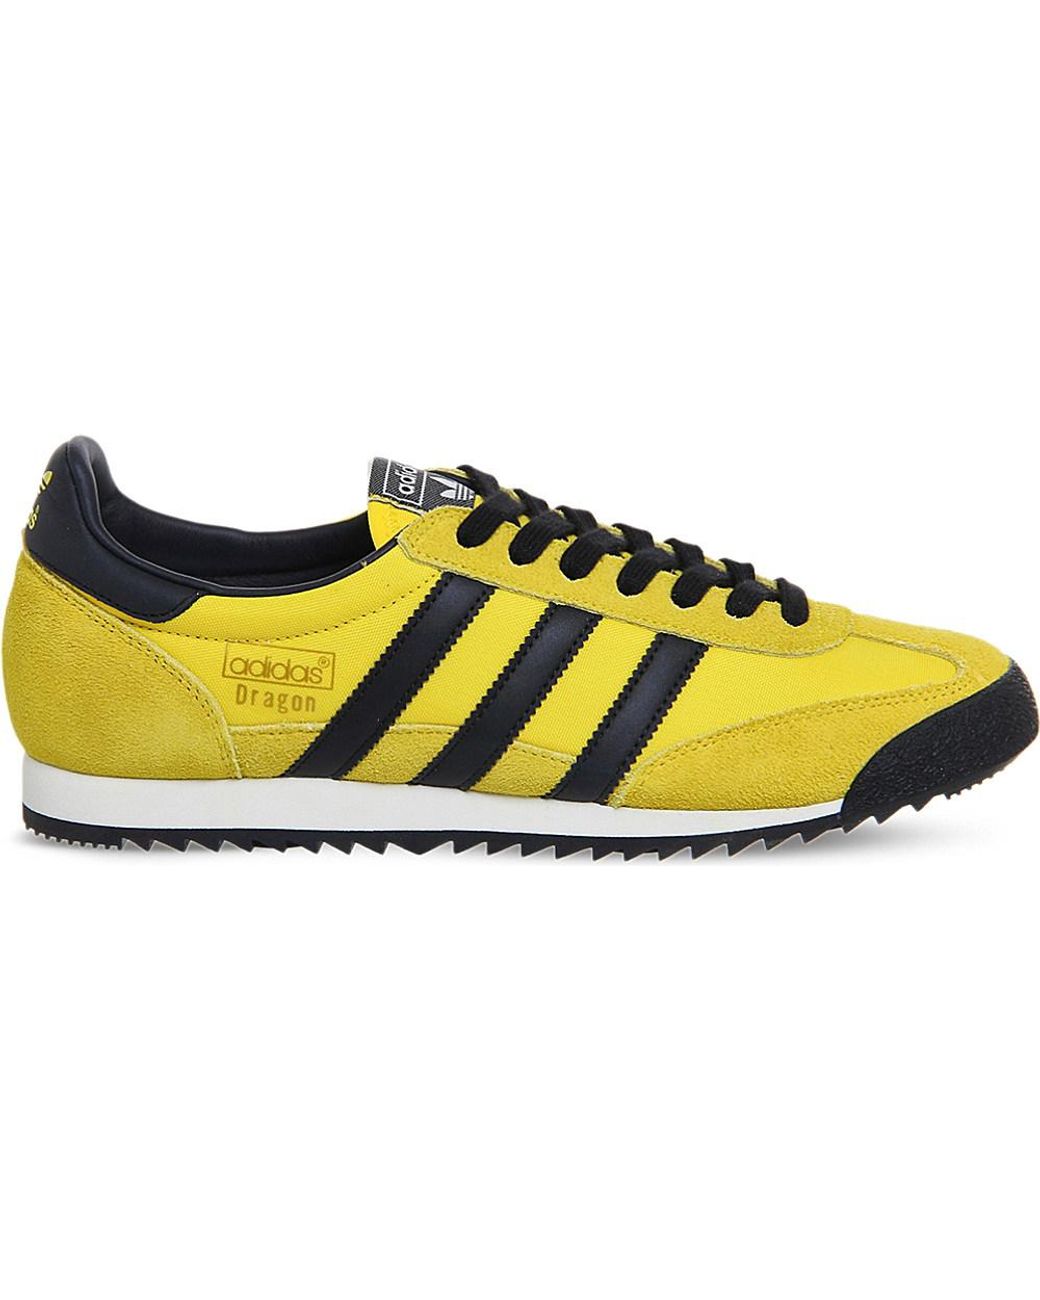 adidas Originals Dragon Vintage Trainers in Yellow for Men | Lyst